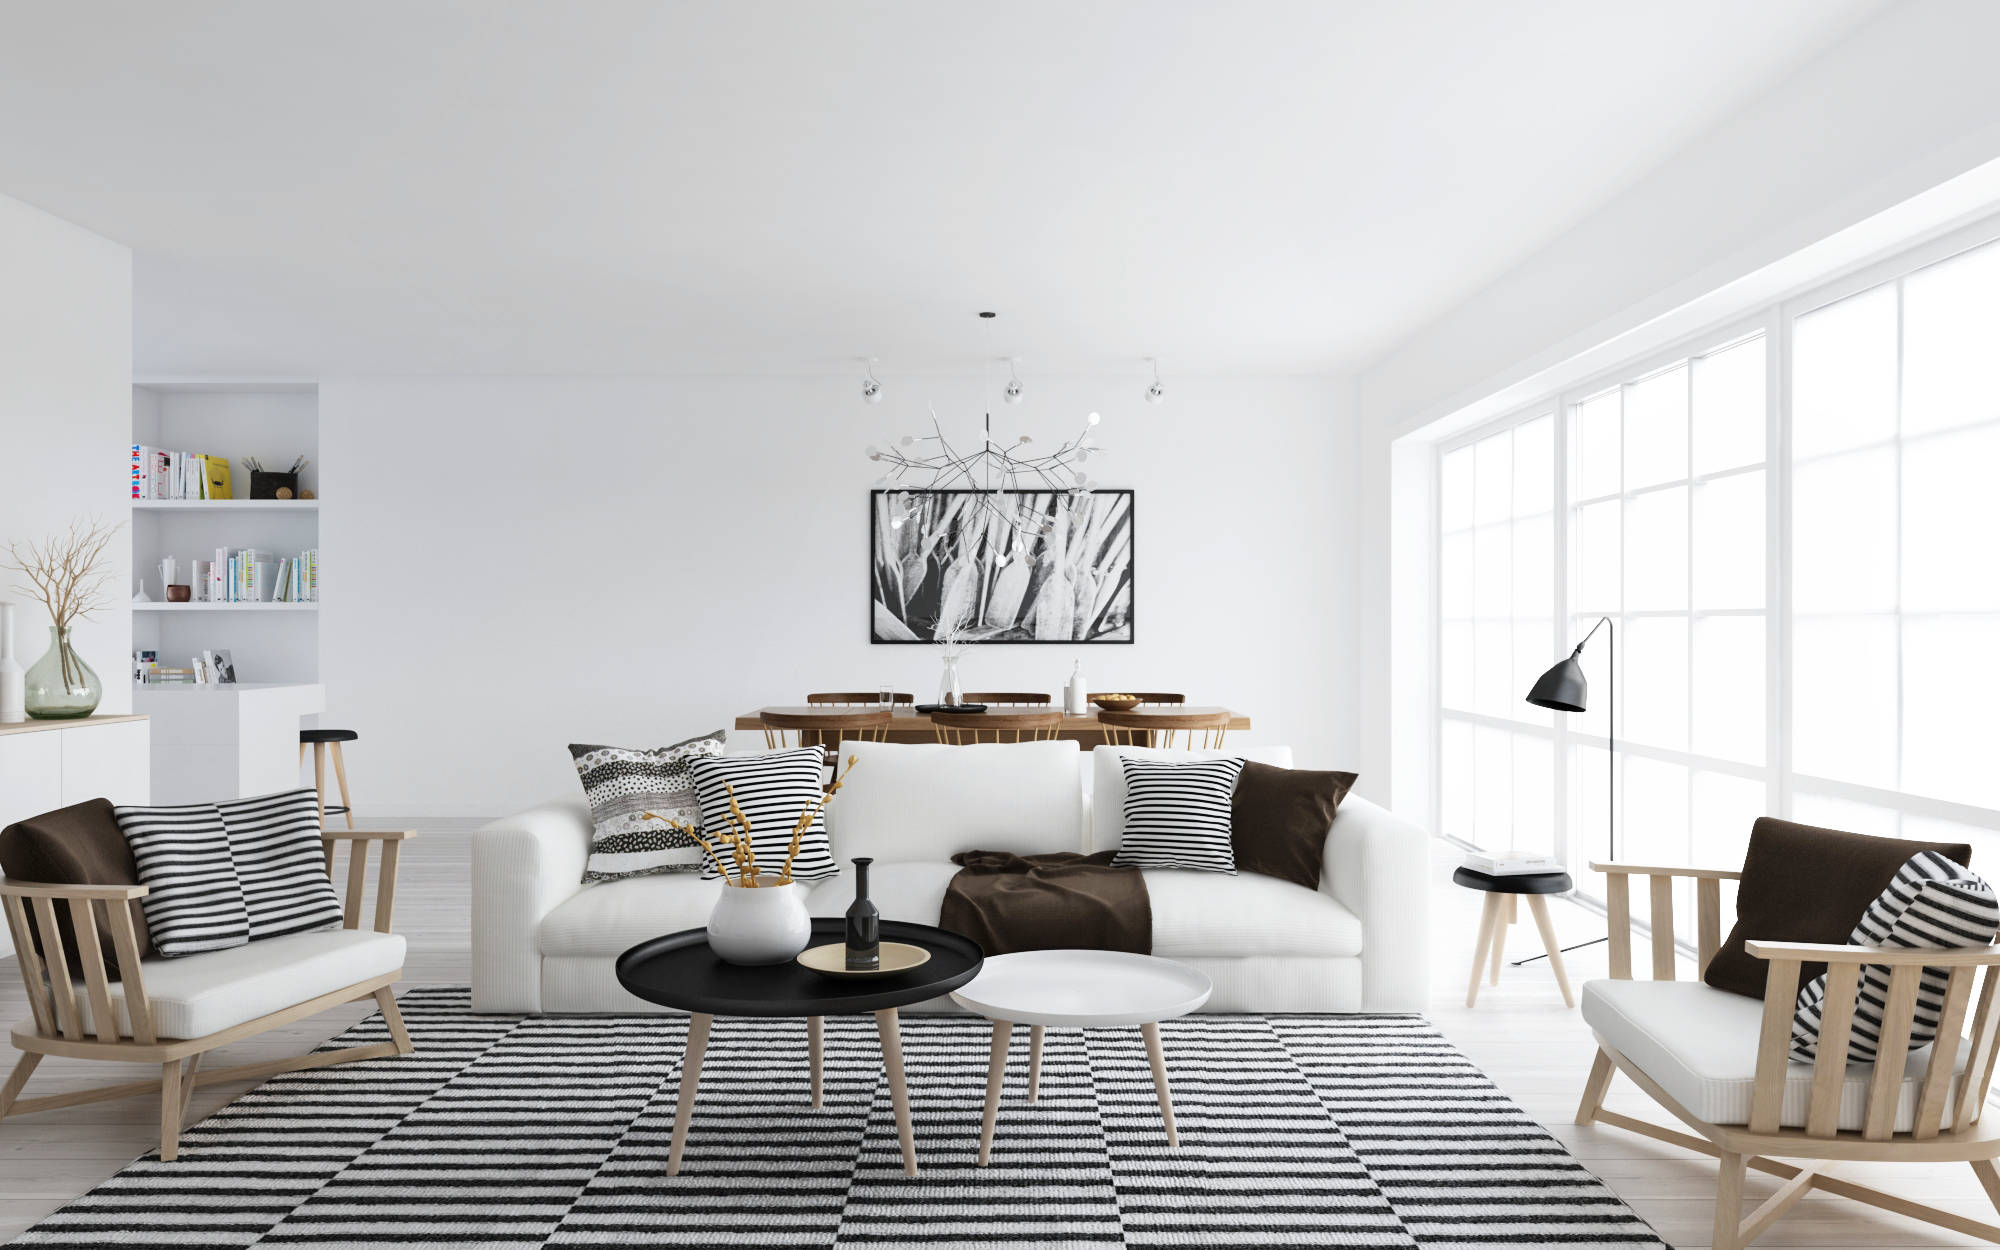 Black and white is a classic color combination for scandinavian design